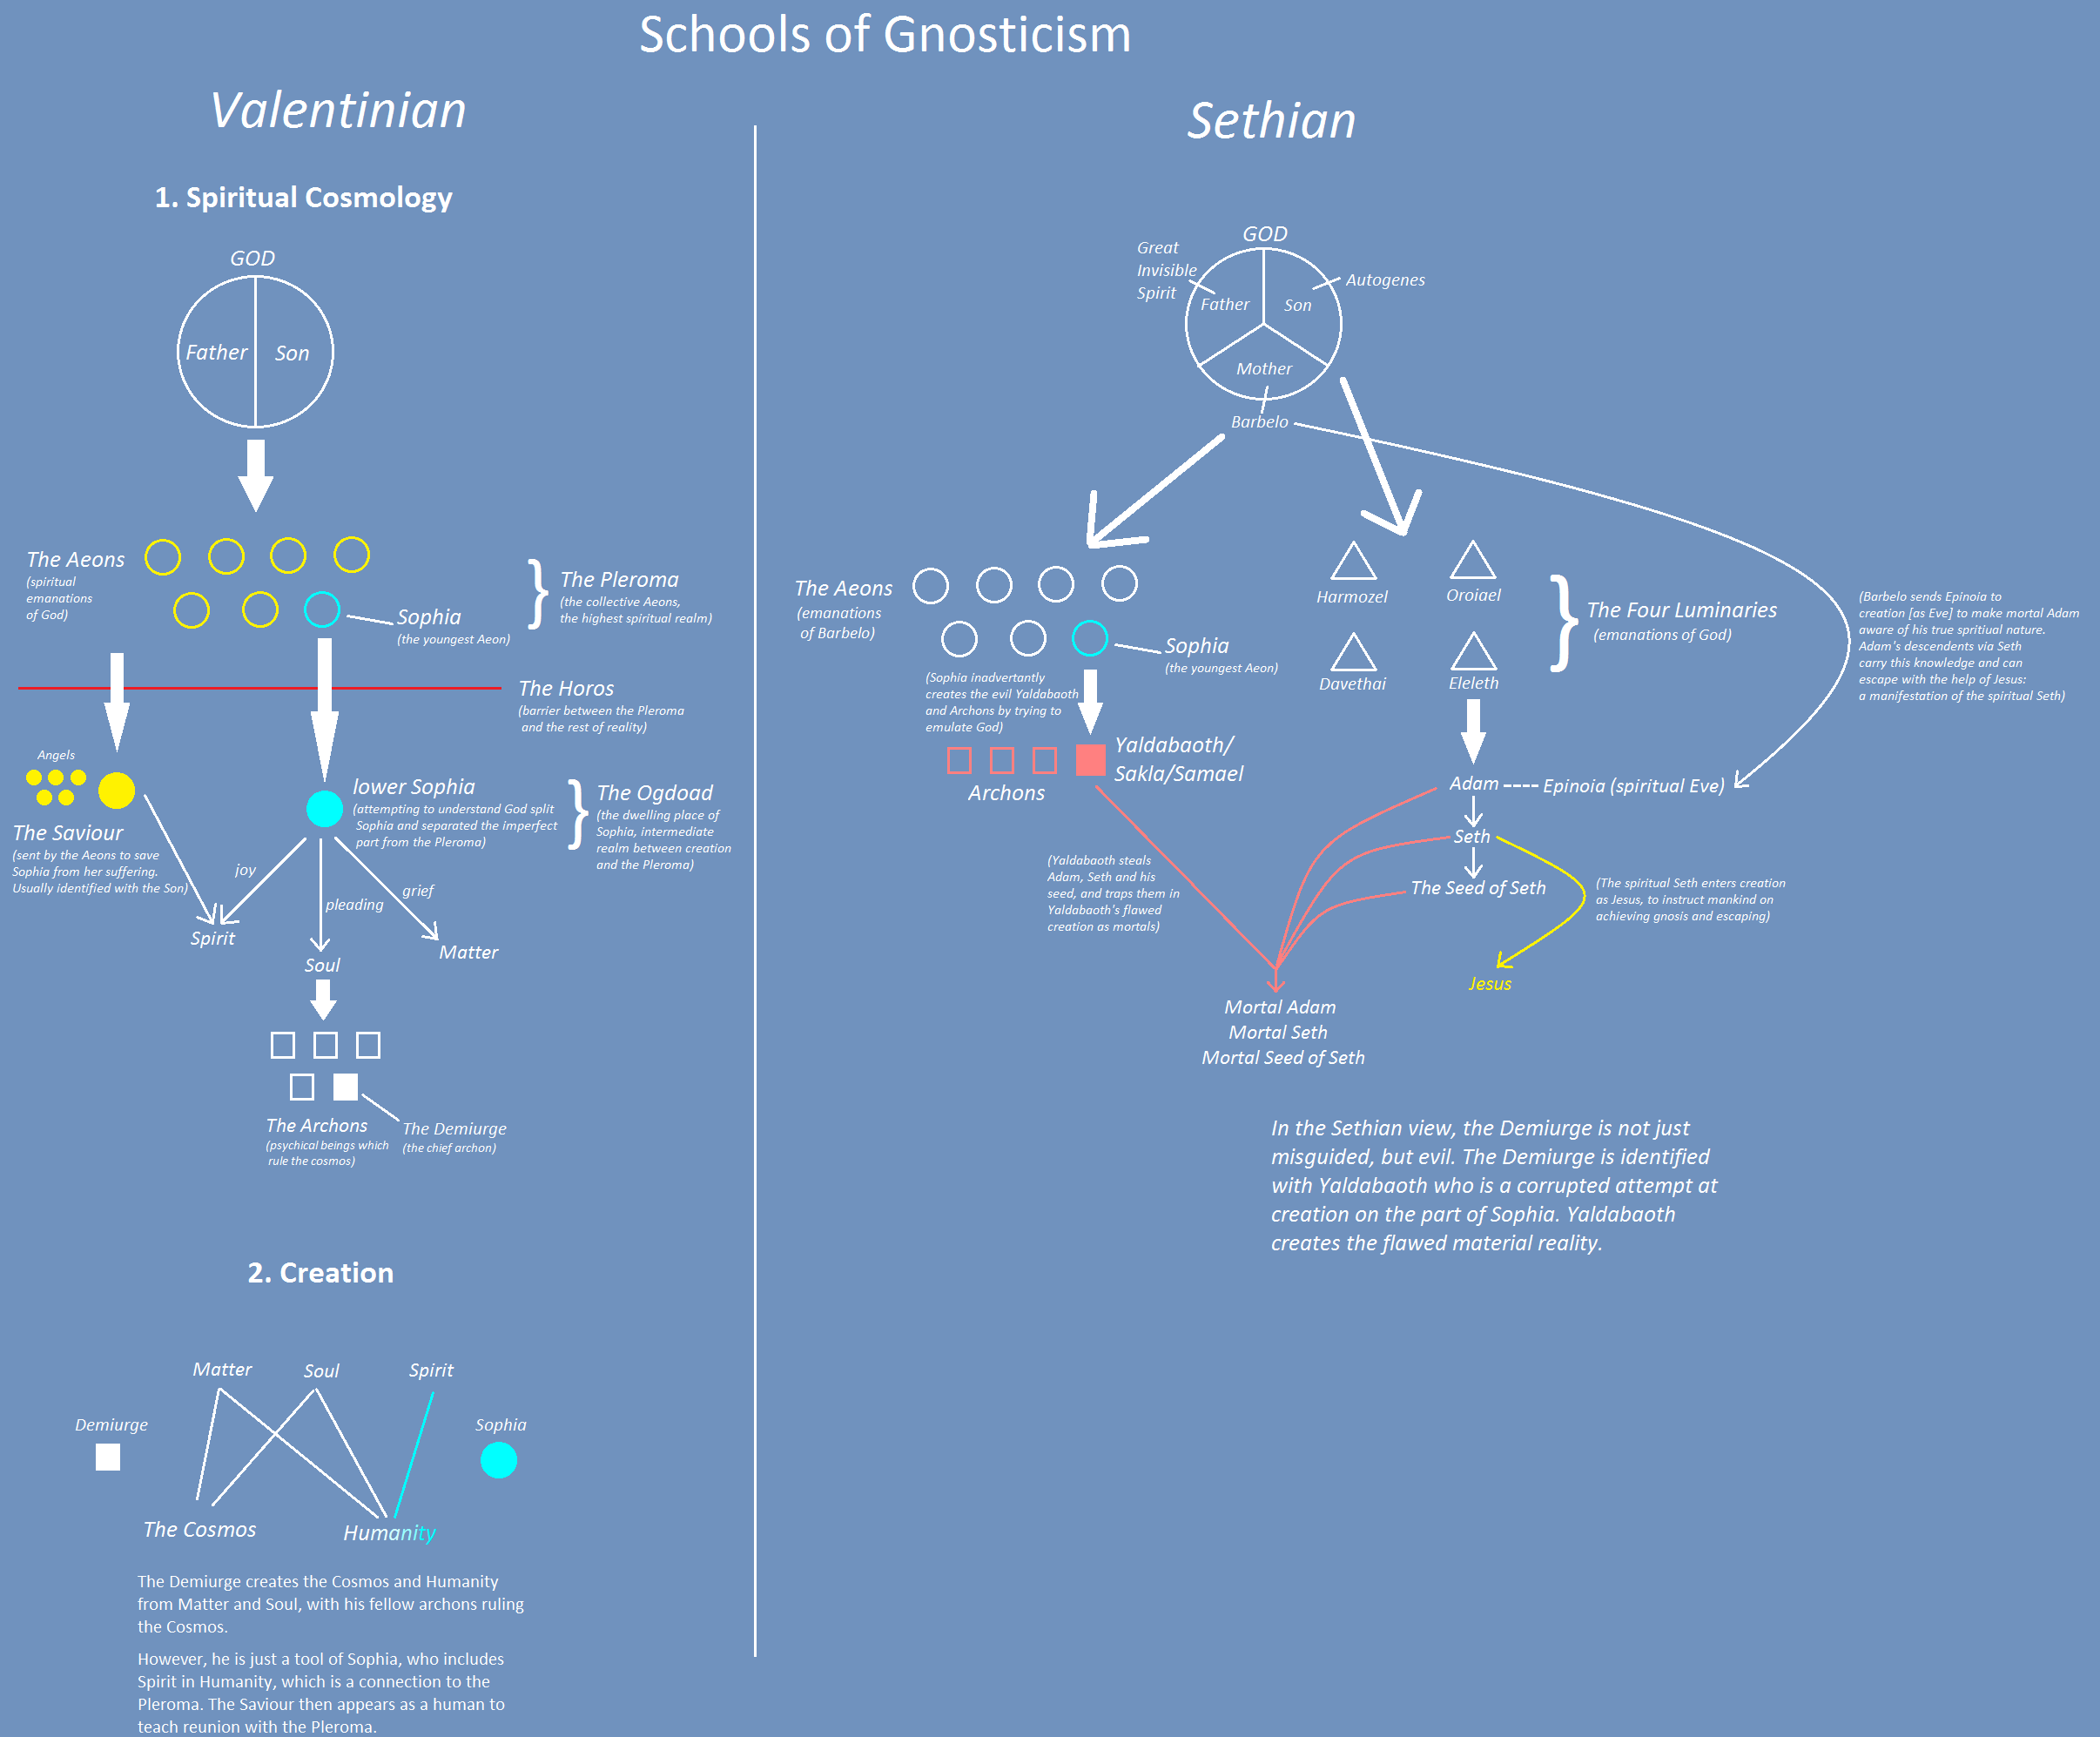 Figure 1: Sethianism vs Valentinianism, from a reddit post